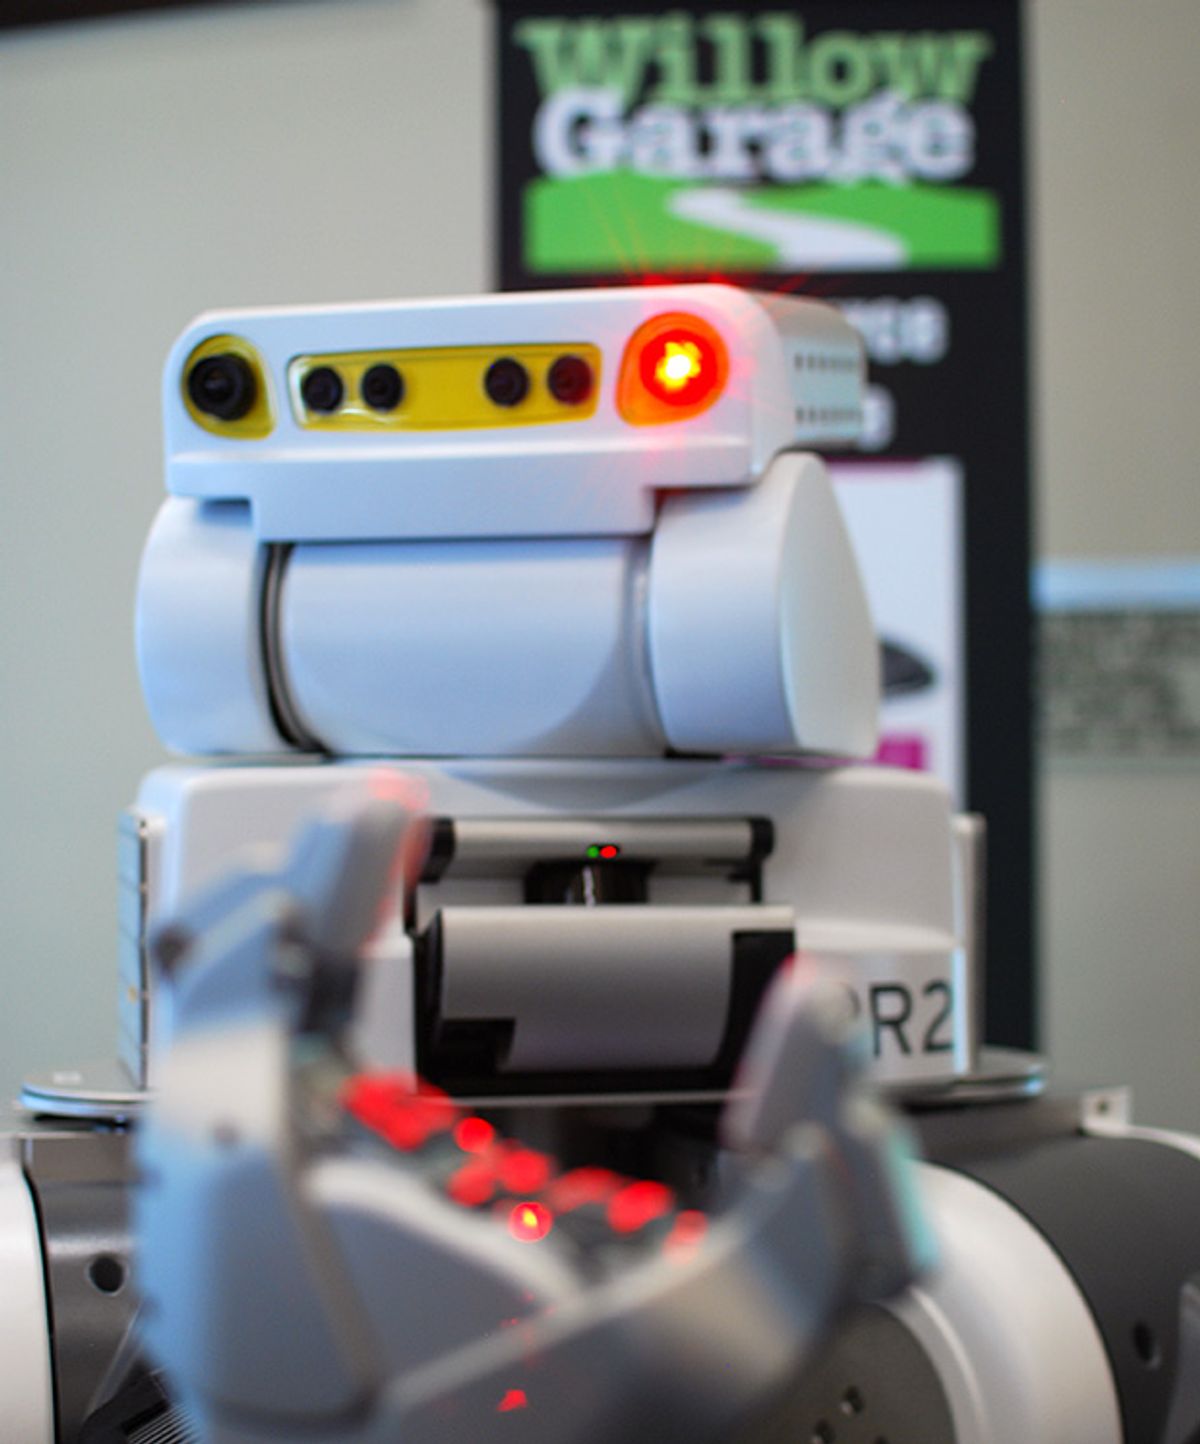 Clearpath Robotics to Provide PR2 Support Through 2016